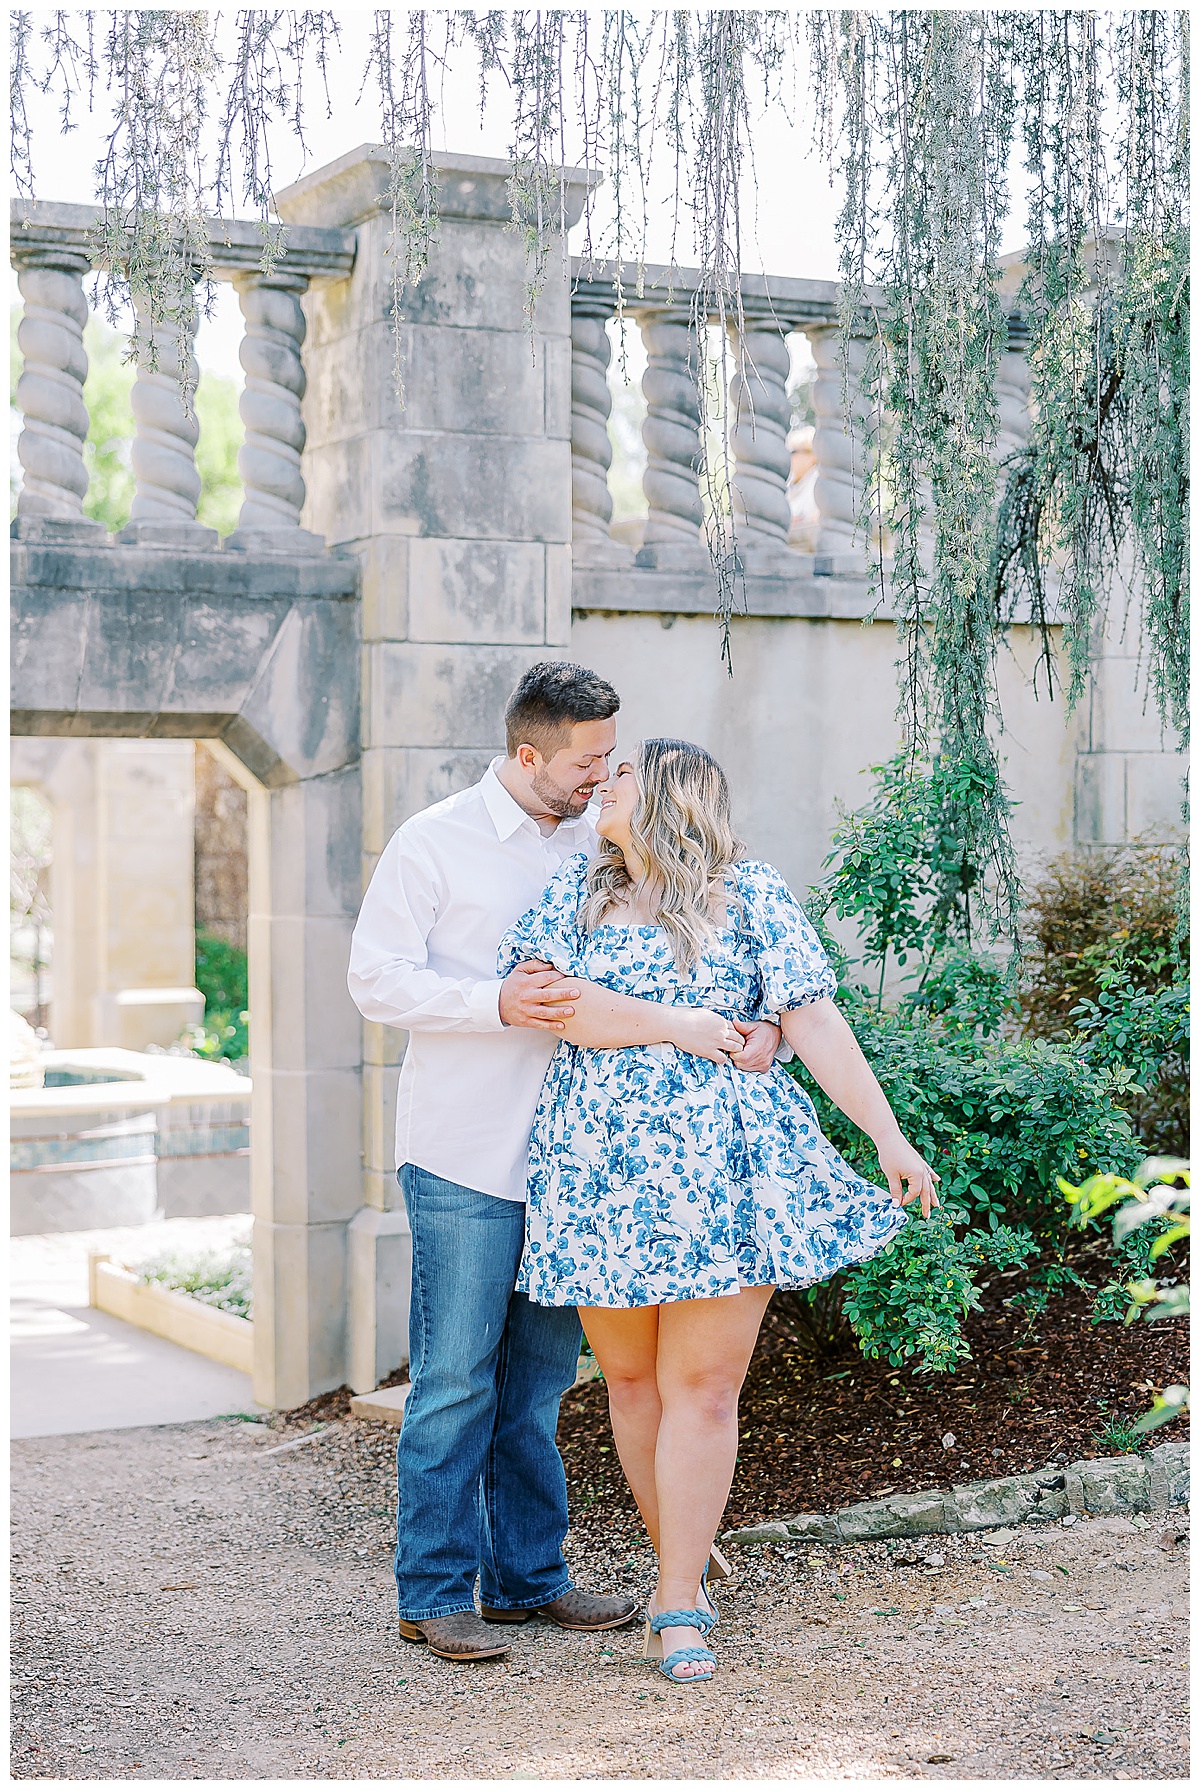 Garrett and Julianne's sunrise engagement session at the Dallas Arboretum in the Poetry Gardens. Dallas wedding photographer. Dallas engagement photographer. The Dallas Arboretum and Botanical Gardens.